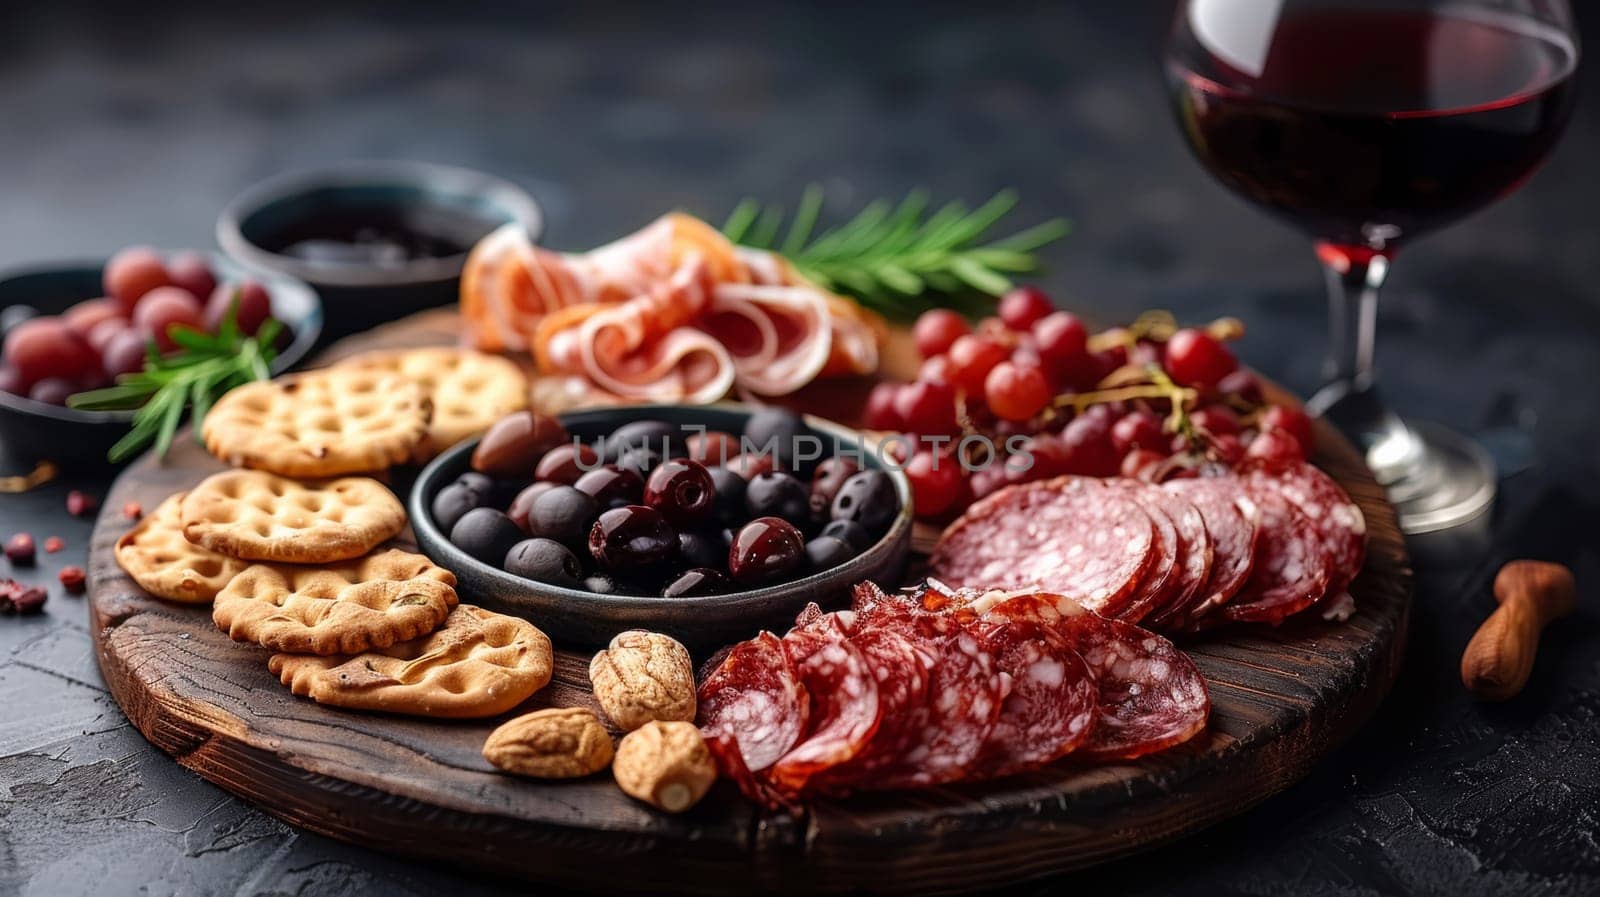 A plate of food with crackers, olives and grapes